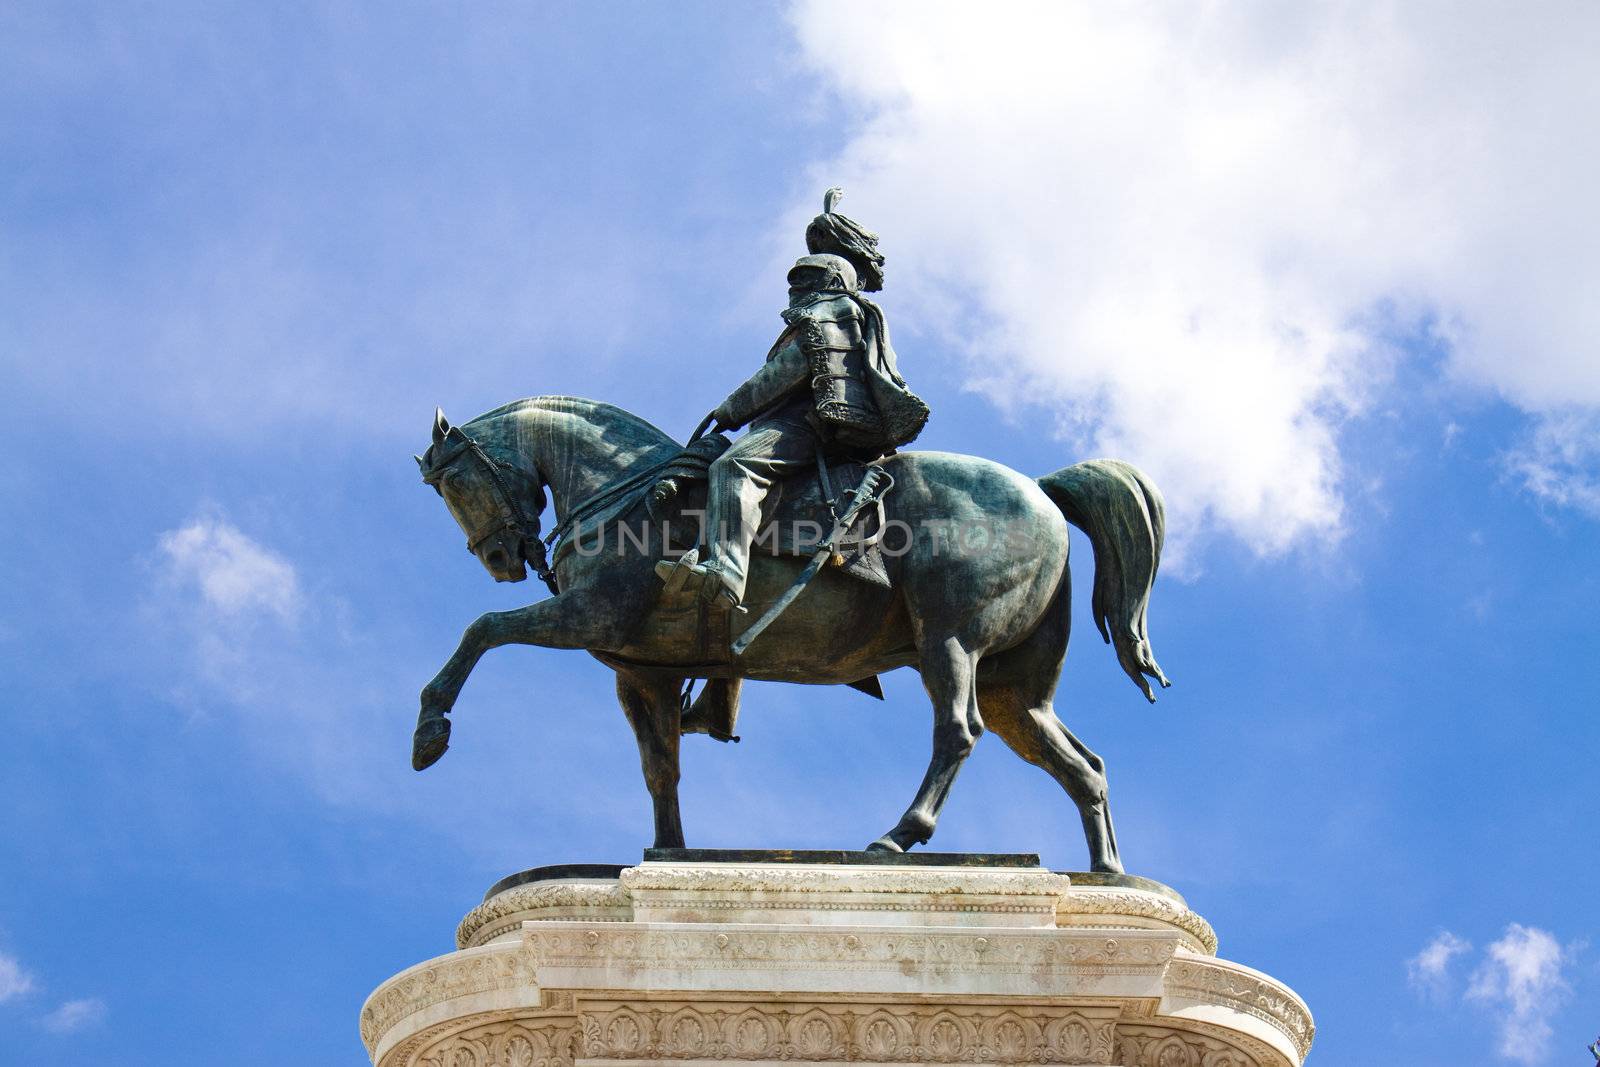 An image of the equestrian sculpture of Vittorio Emanuele ll in Rome, Italy.